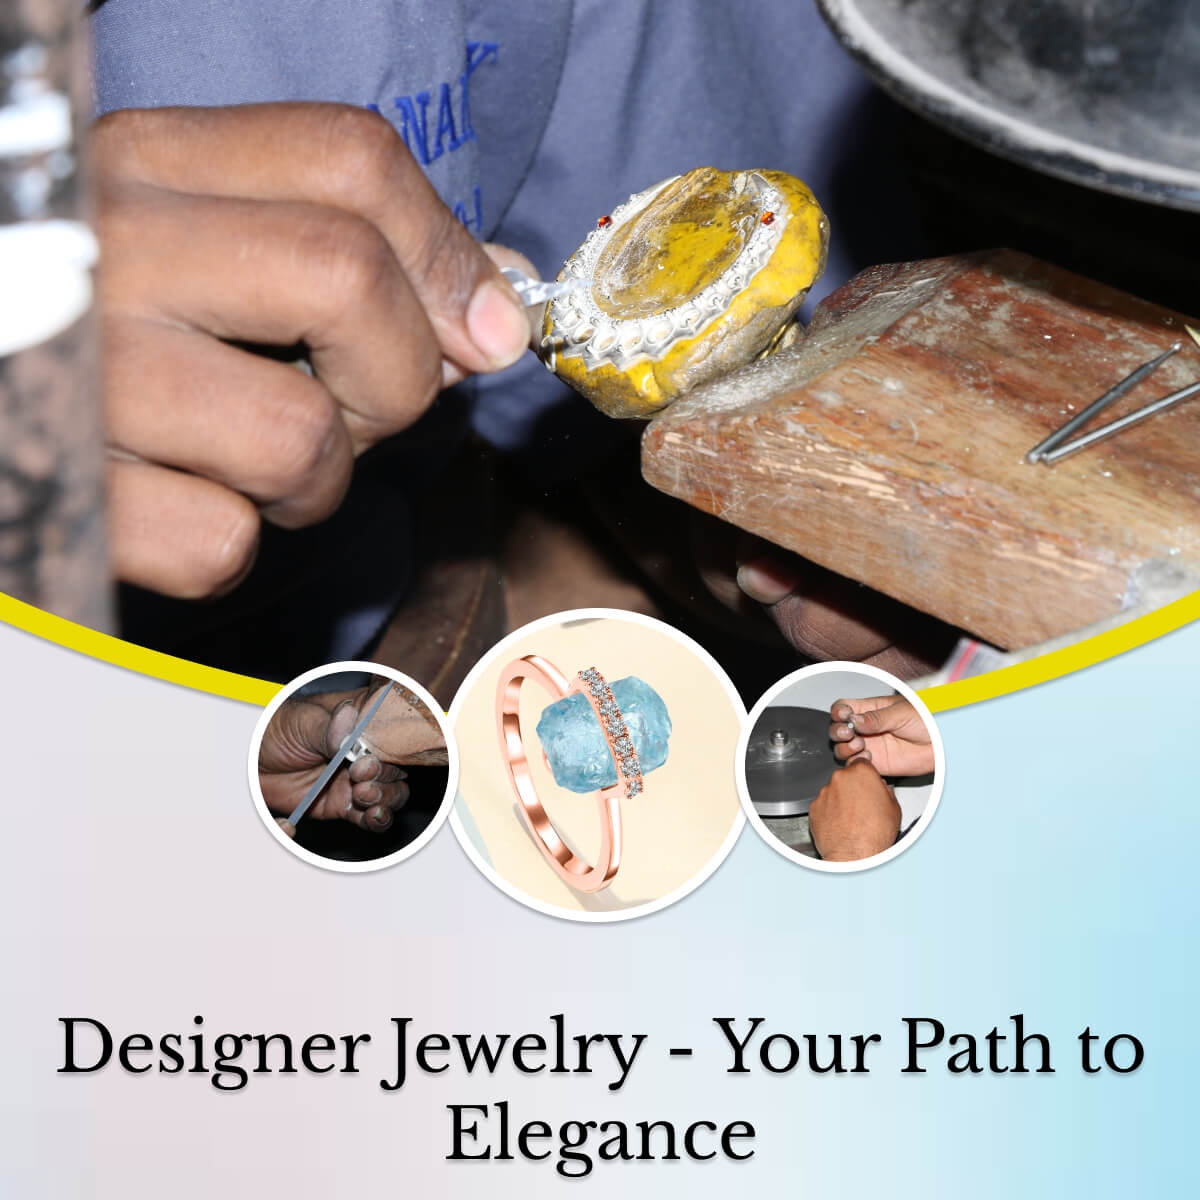 How to Get The Luxurious Look With Designer Jewelry